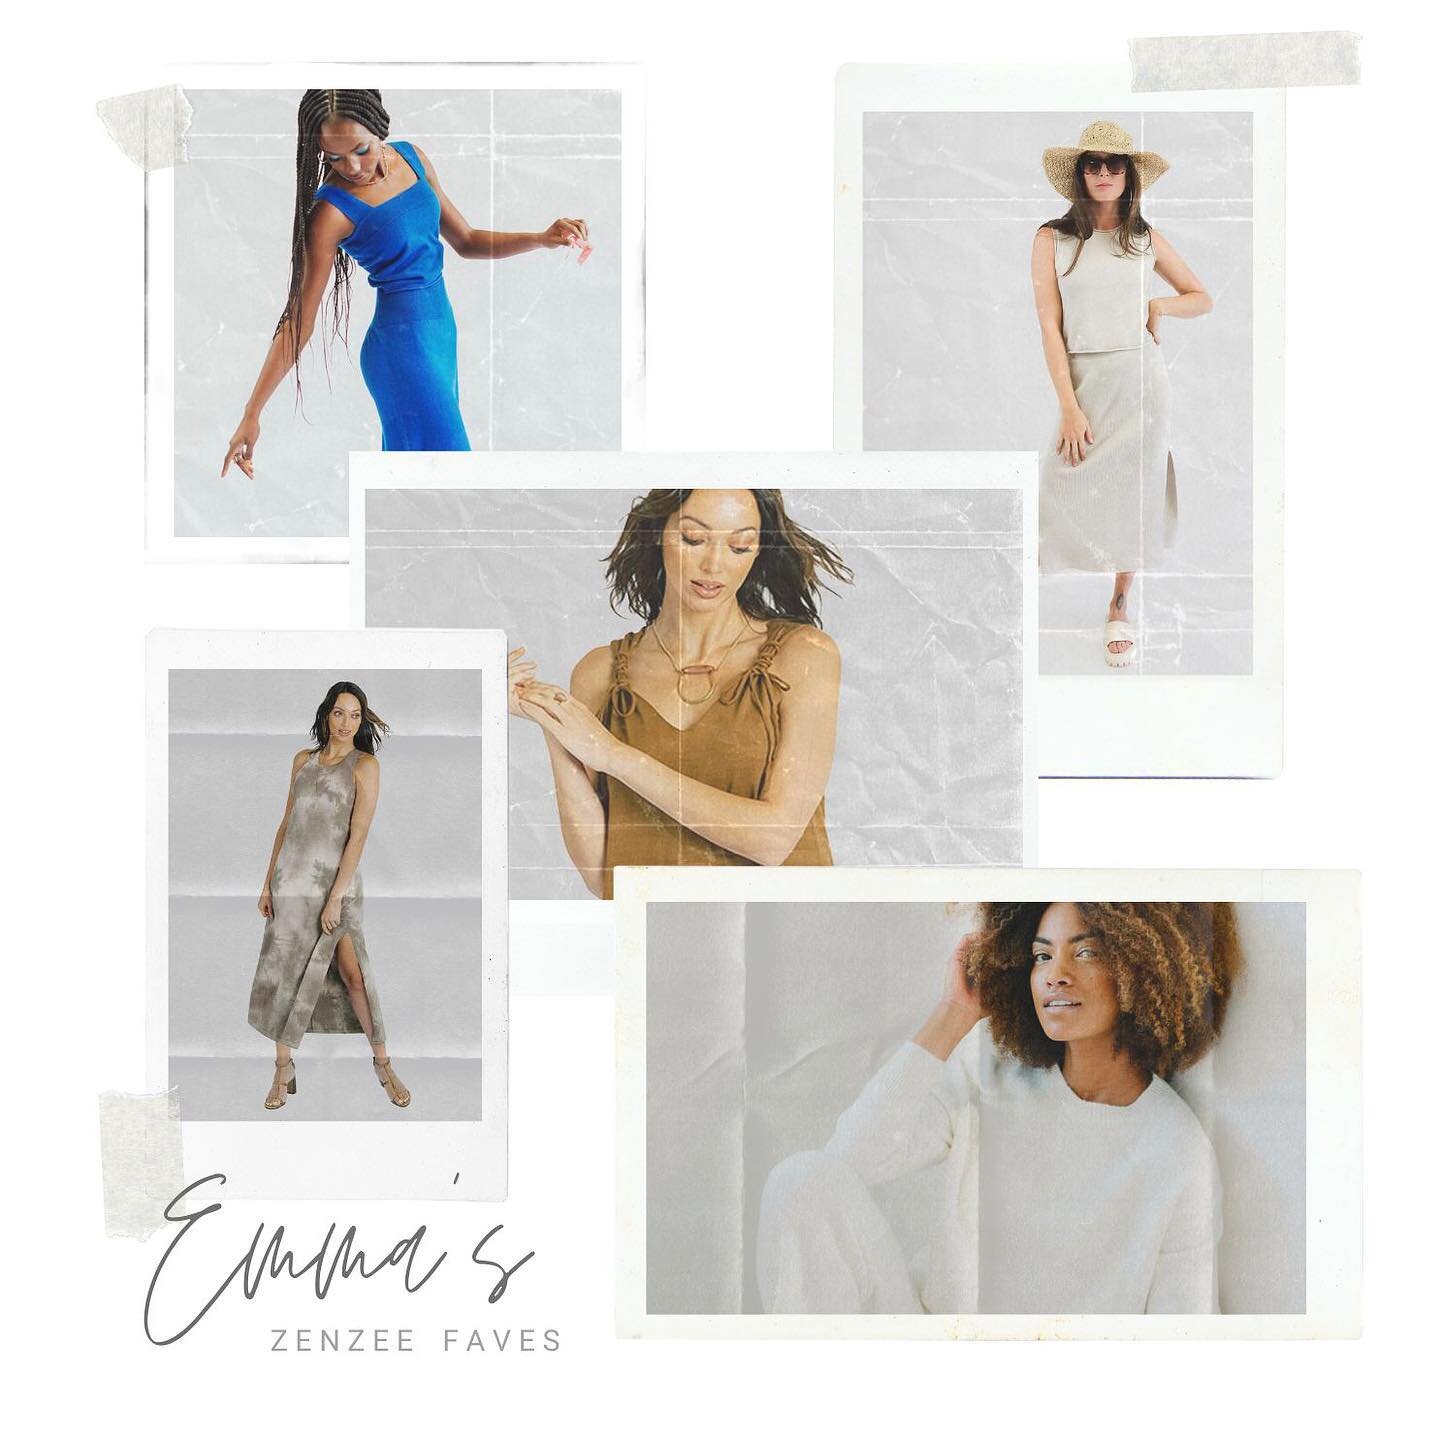 Emma&rsquo;s Faves: The Daily-Wear Edition 

In honor of it being our amazing sewist Emma&rsquo;s birthday 🥳 we are showcasing her favorite Zenzee pieces to wear day-to-day. 

Swipe to learn more about her top picks!